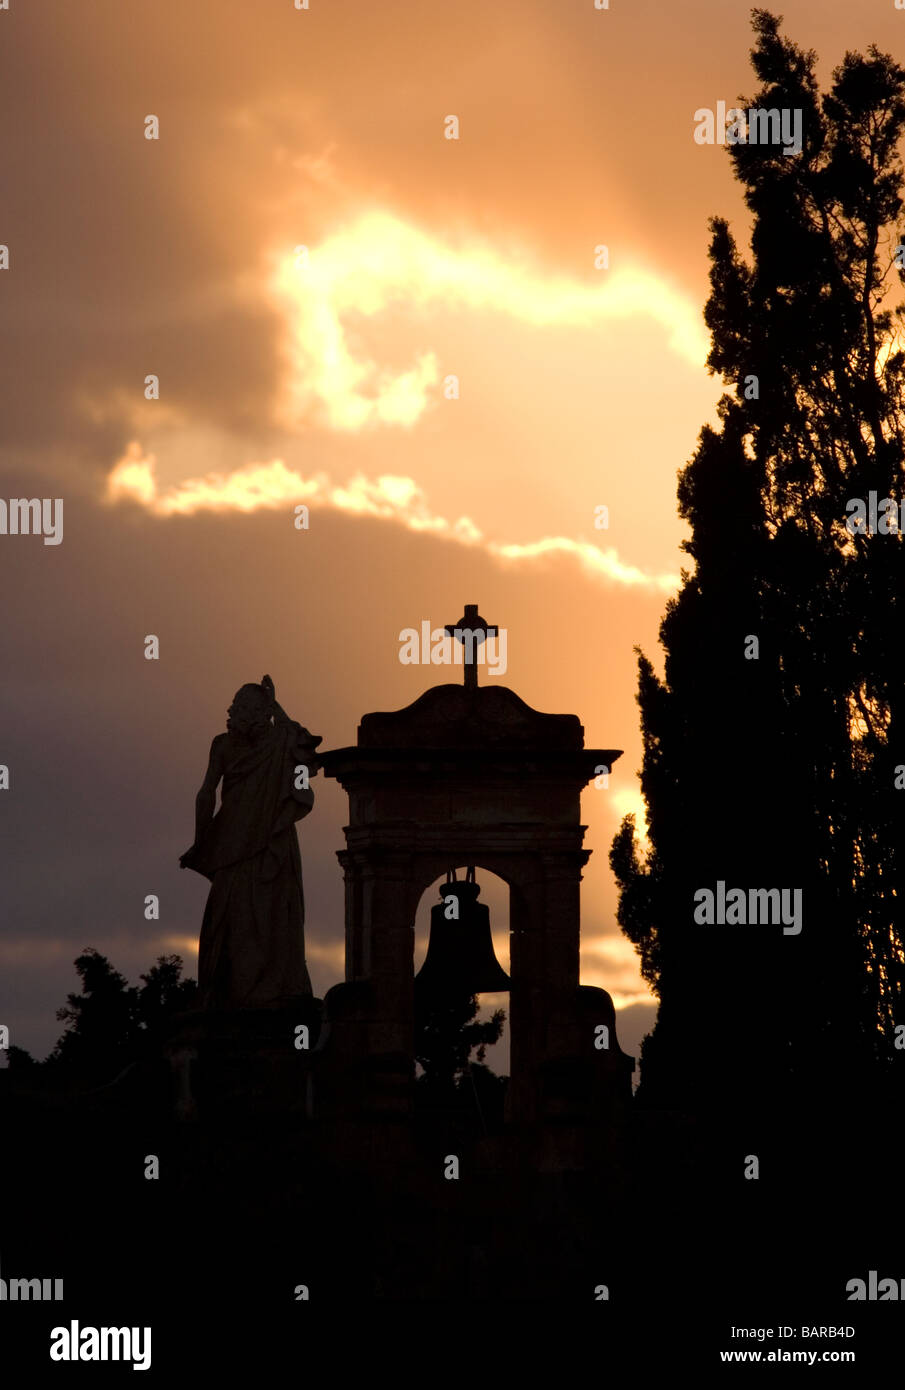 Belfry on chapel in silhouette at sunset. Close up view. Representation of Roman Catholic Christian faith, Catholicism, Christianity, afterlife. Stock Photo